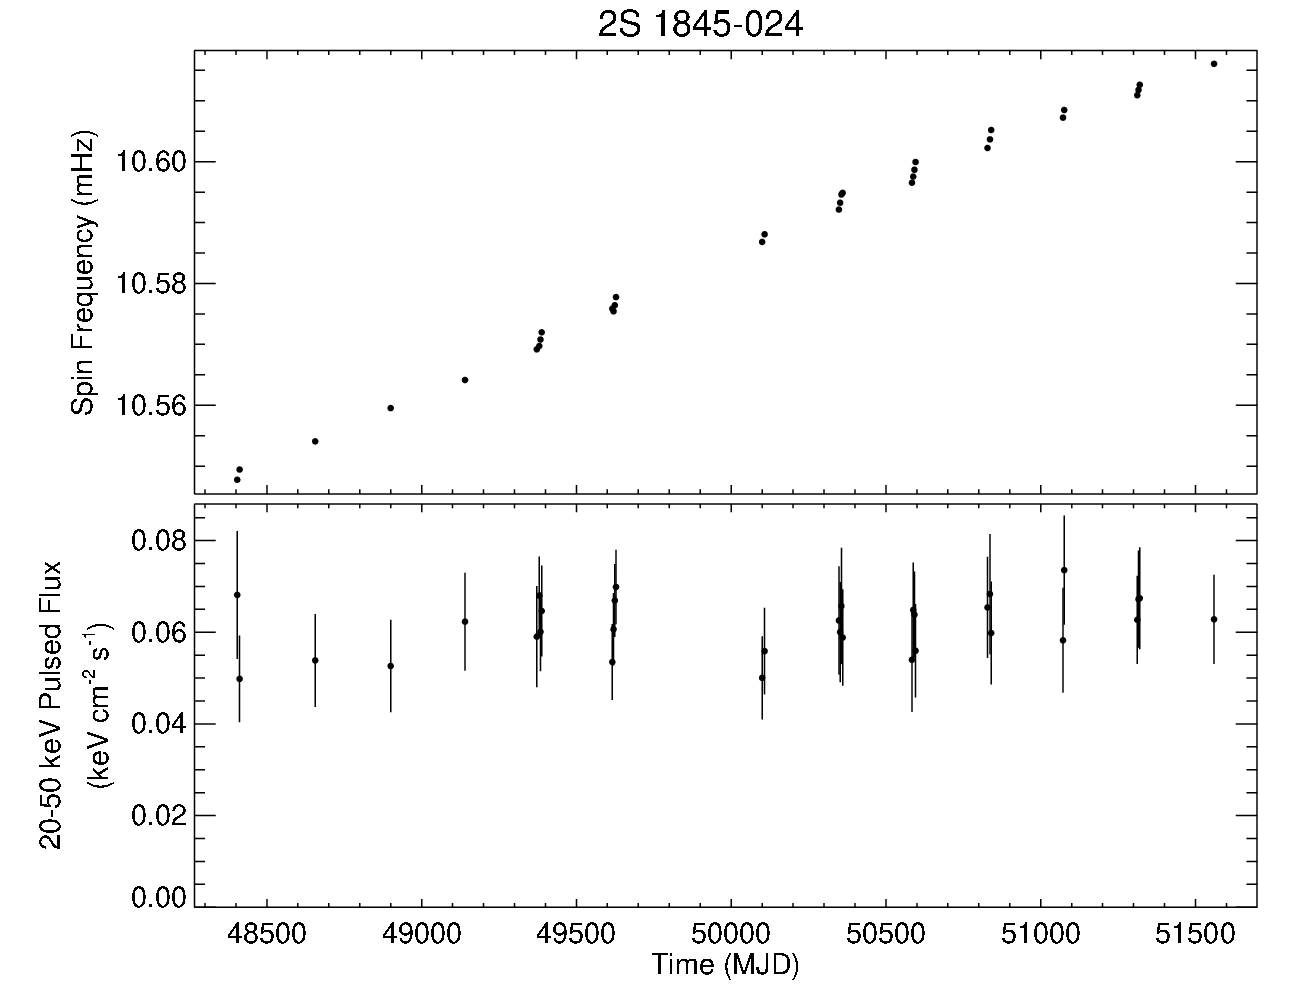 2S 1845-024 Short Frequency History